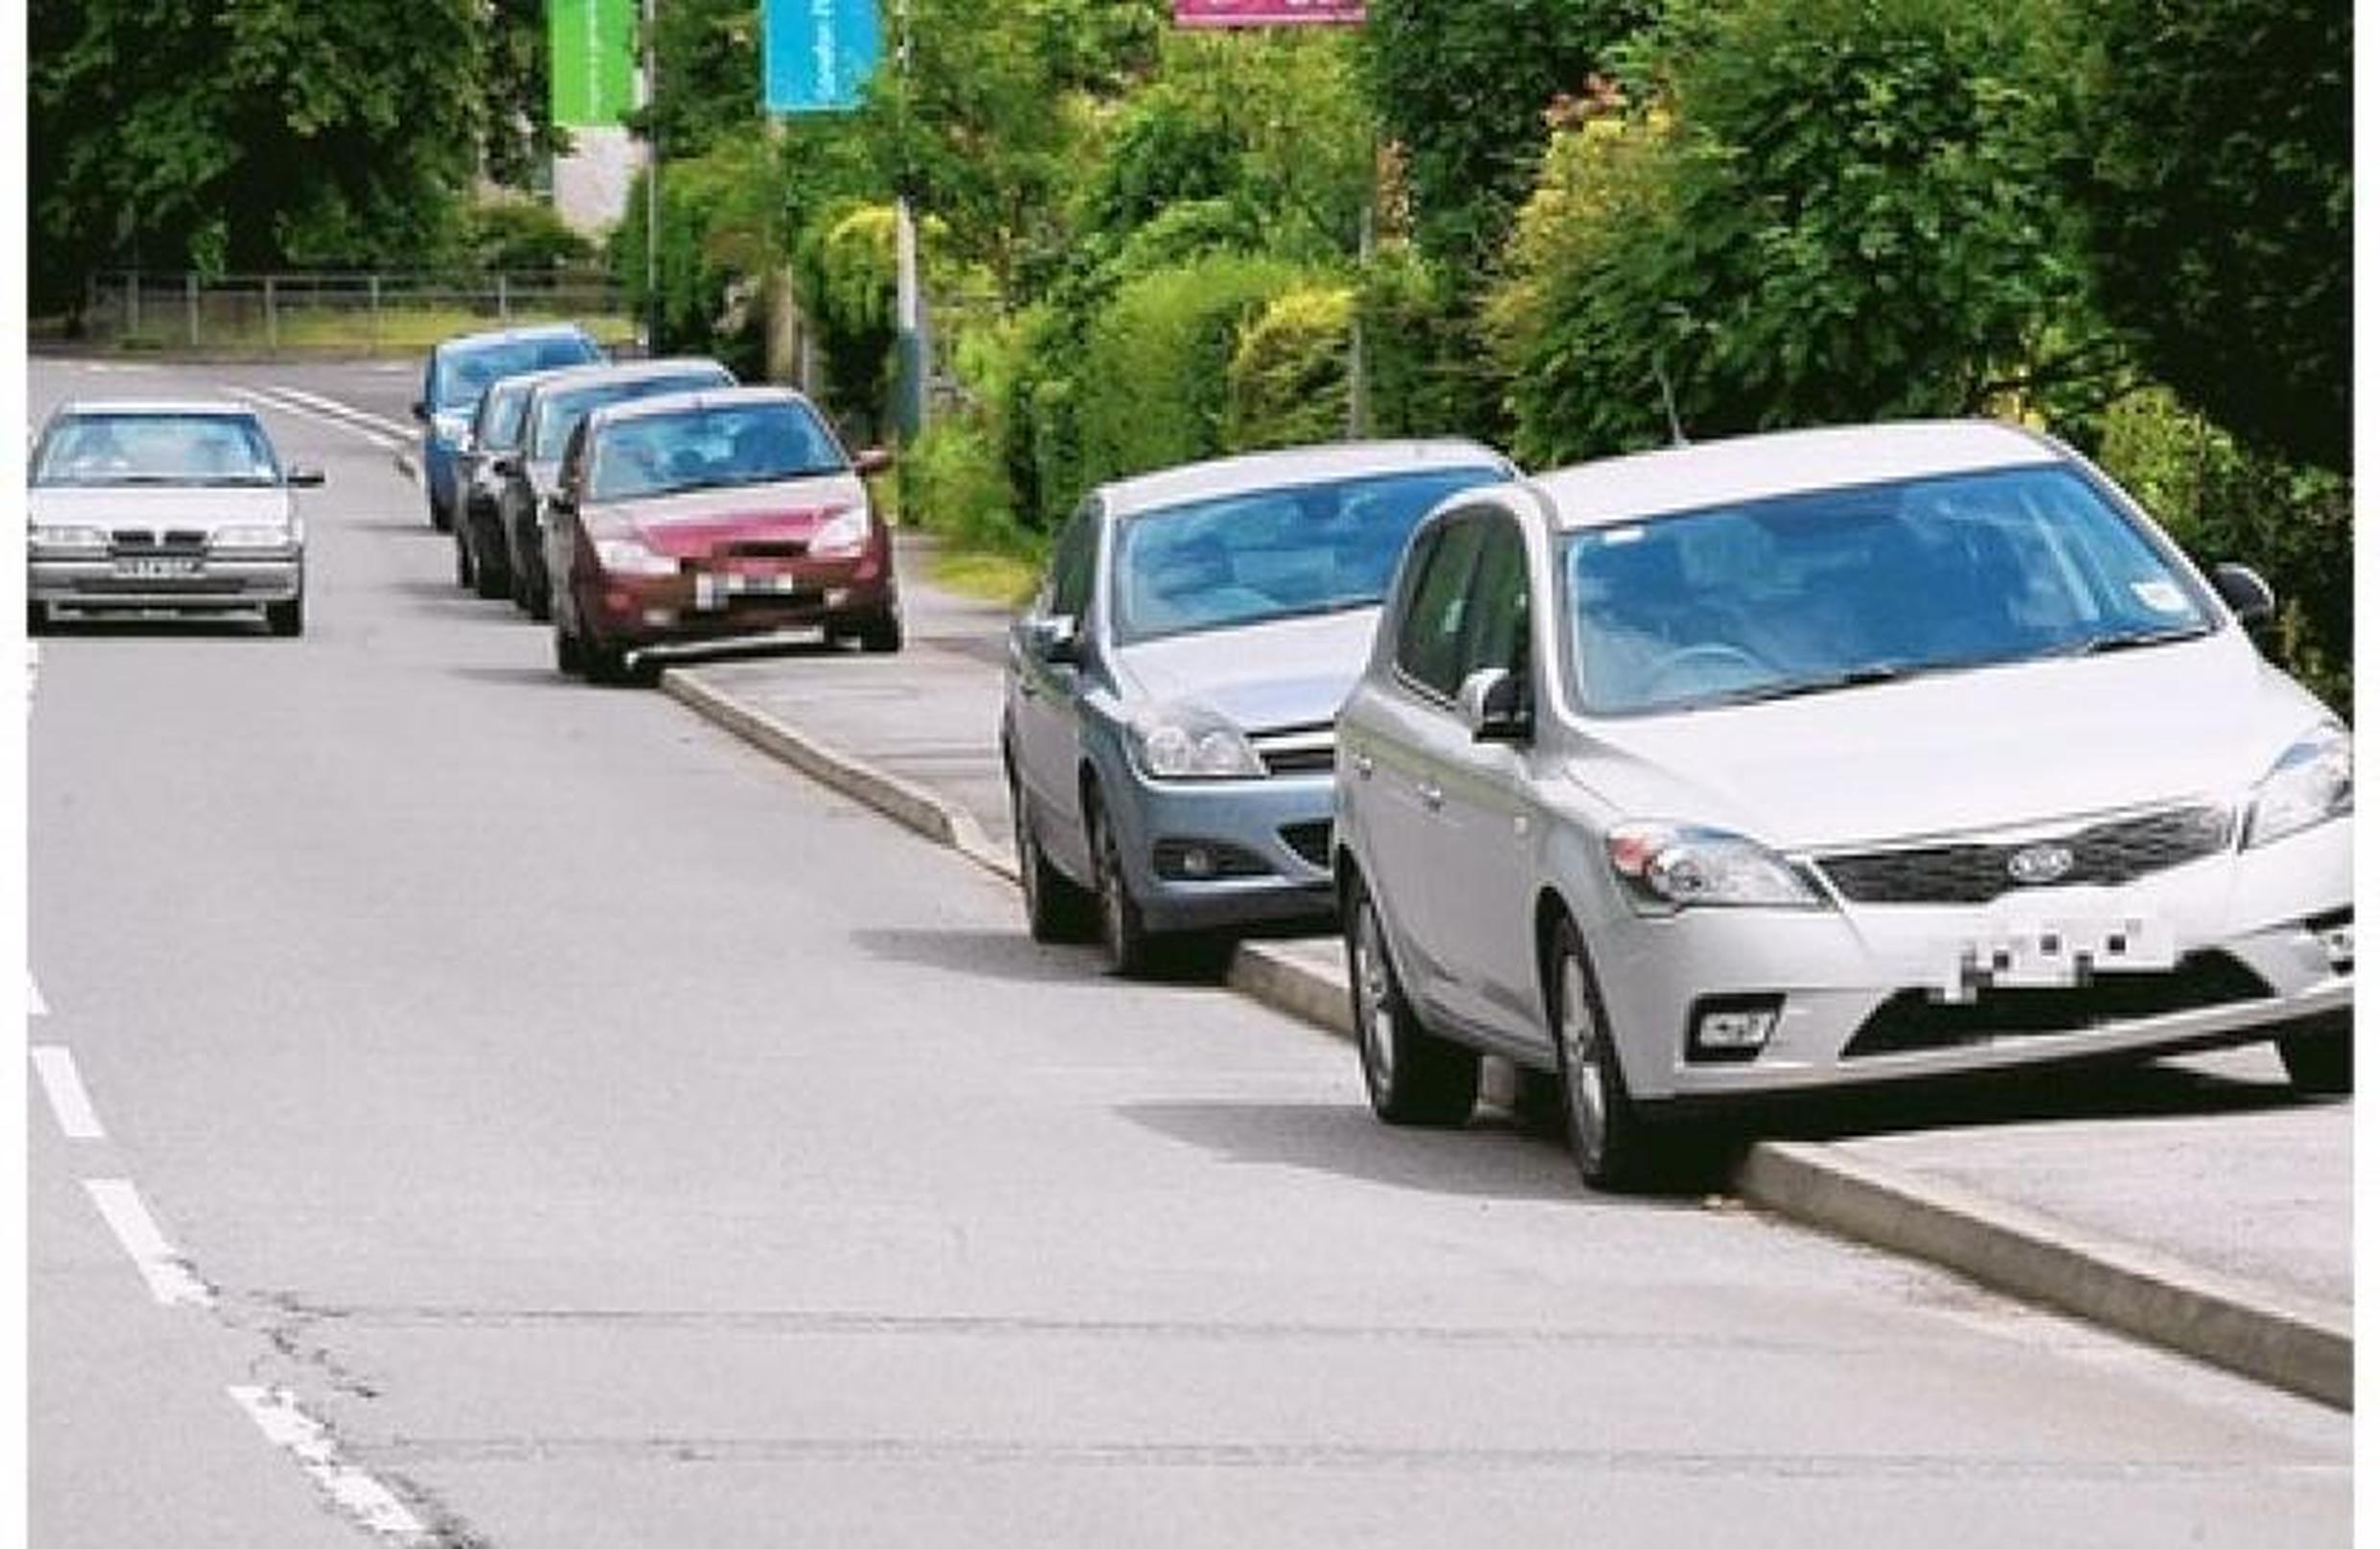 The BPA is calling for a consistent UK-wide common approach to pavement parking